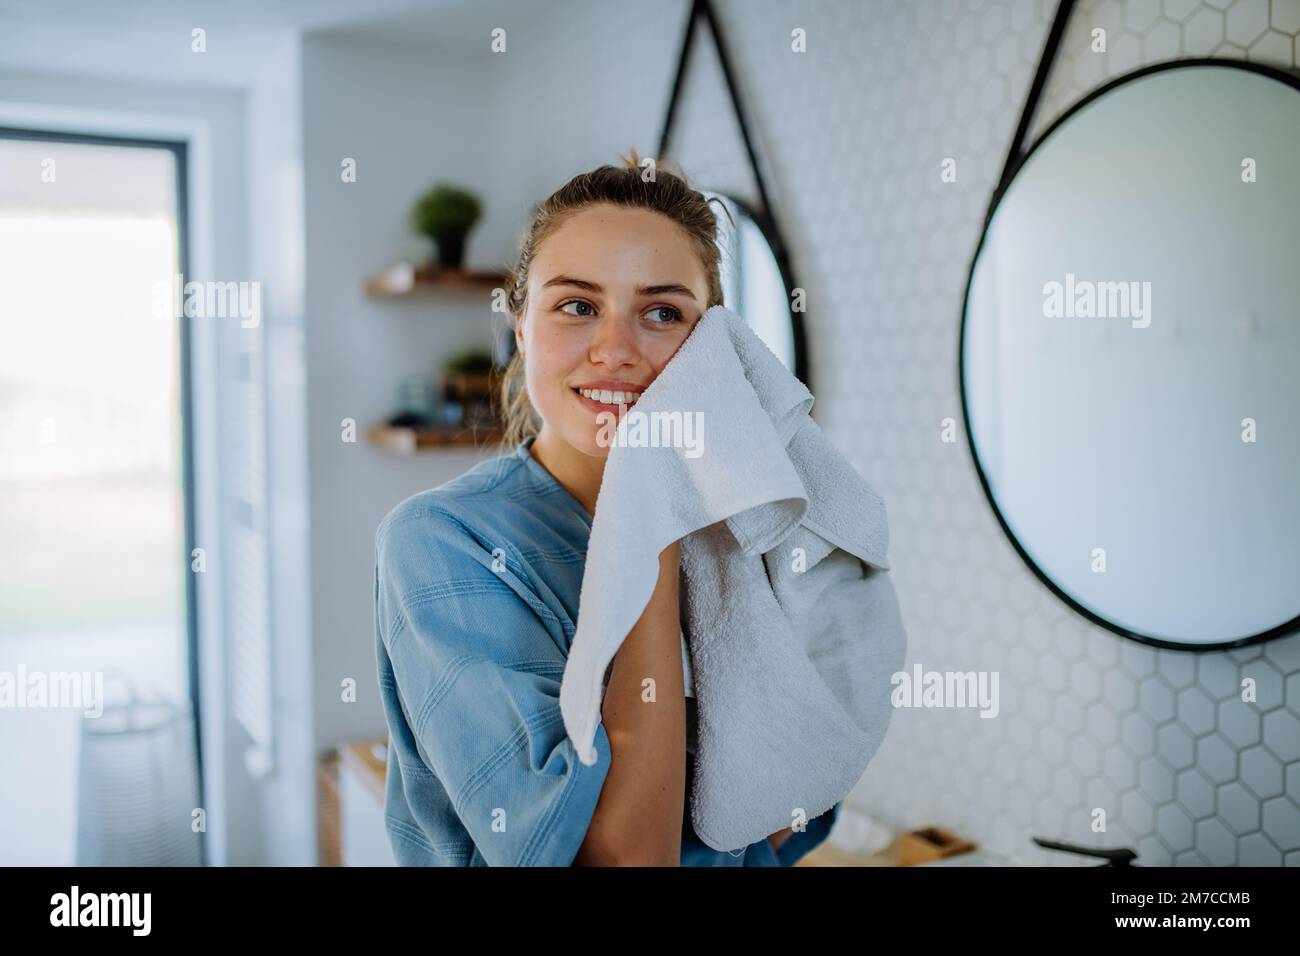 Young woman taking care of her skin, morning beauty routine concept. Stock Photo